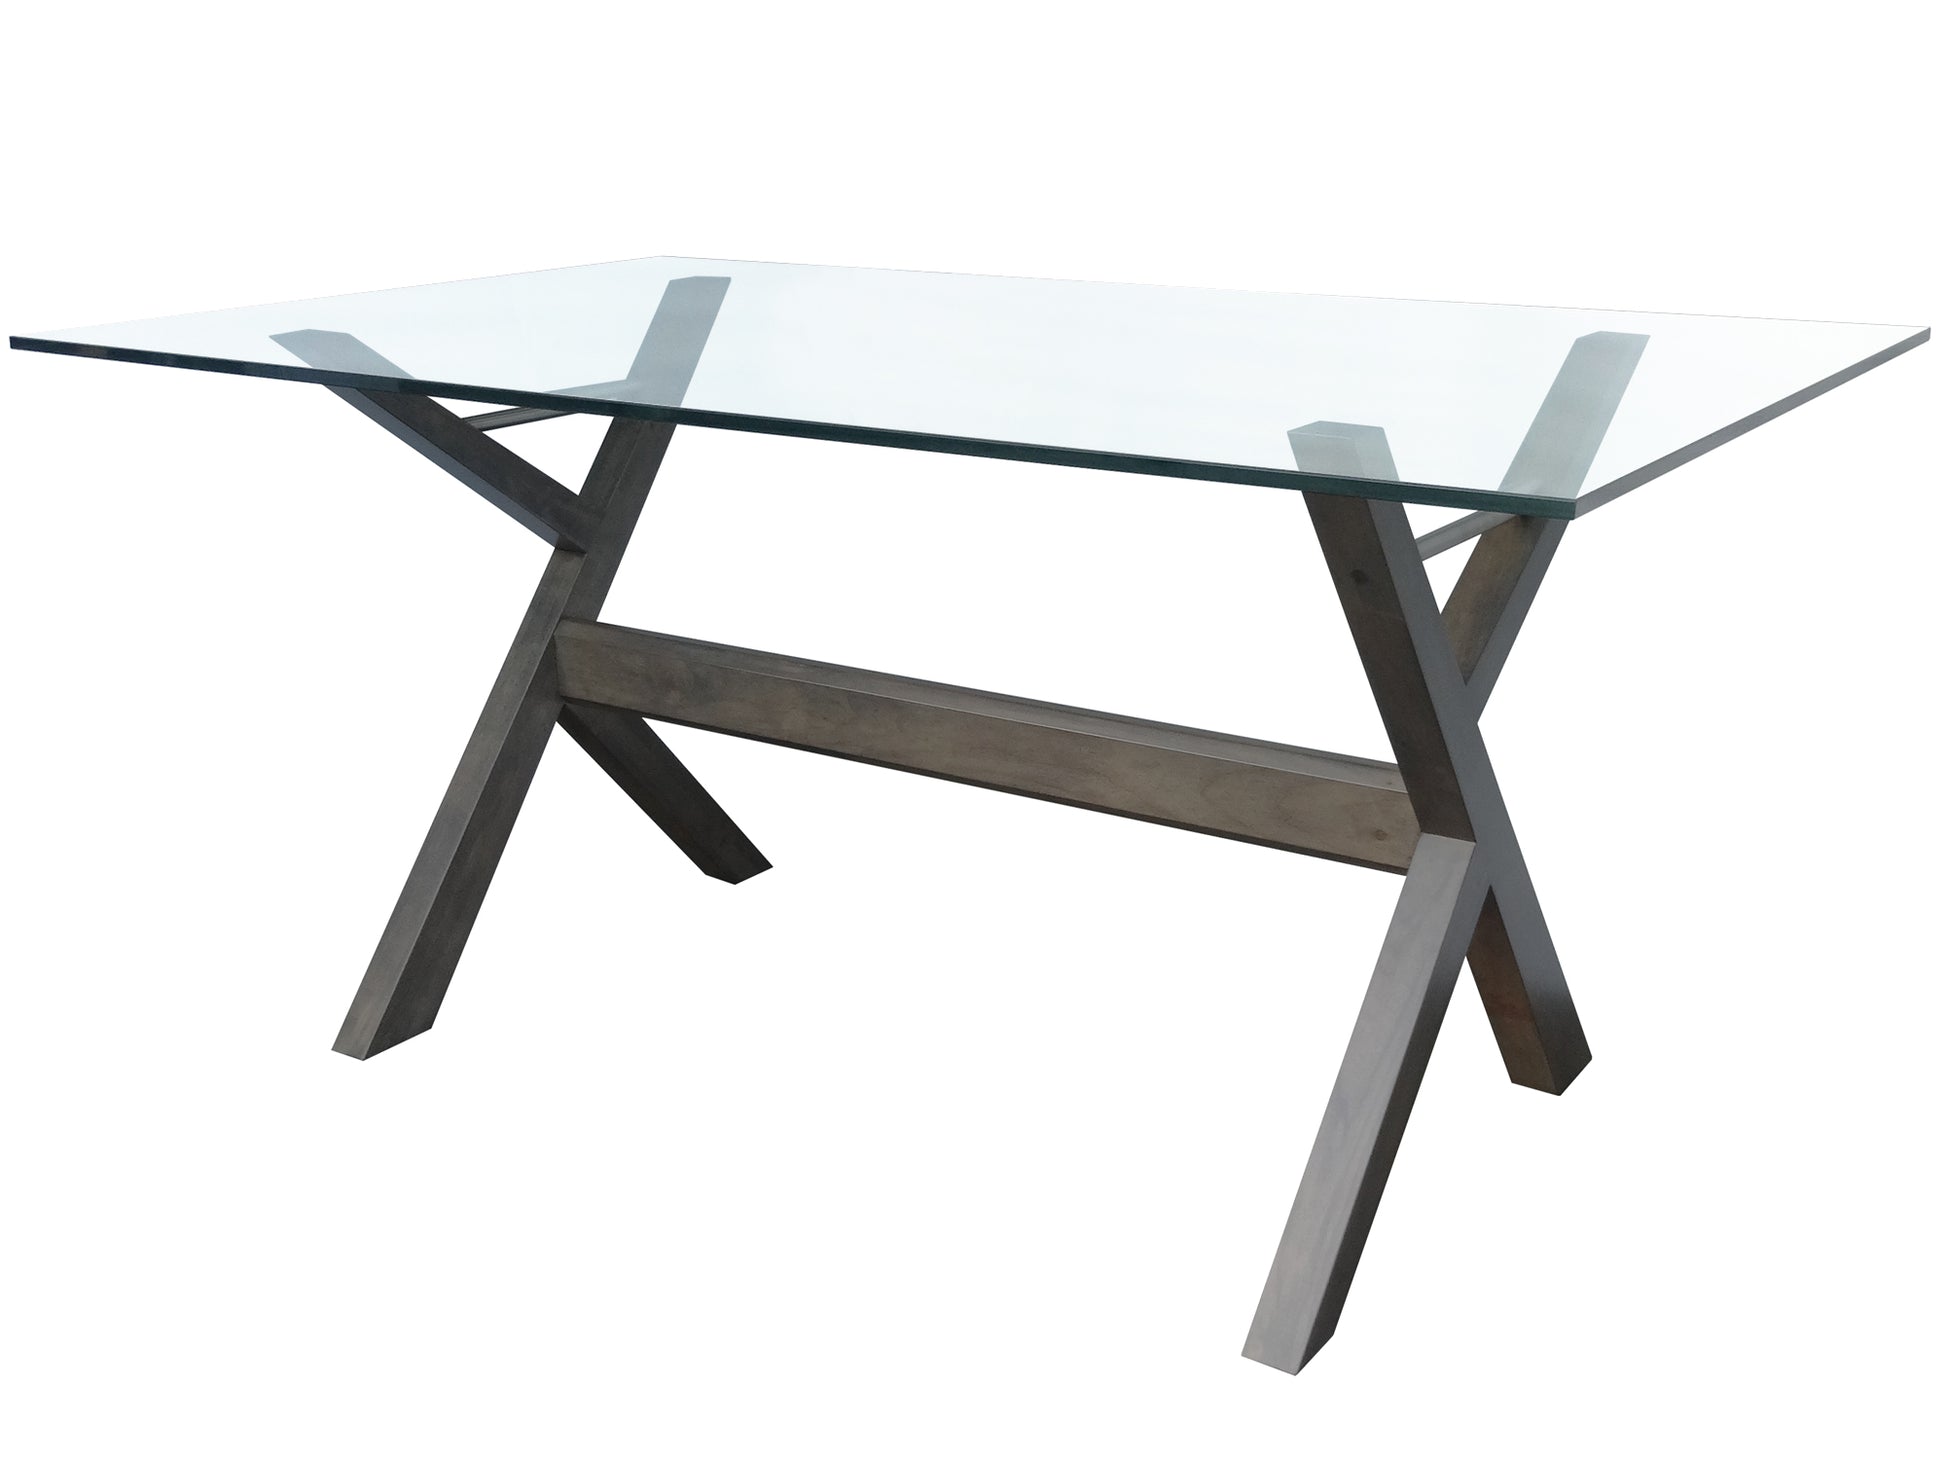 Barcelona Glass top table,Canadian made with a light organic style soliid wood base